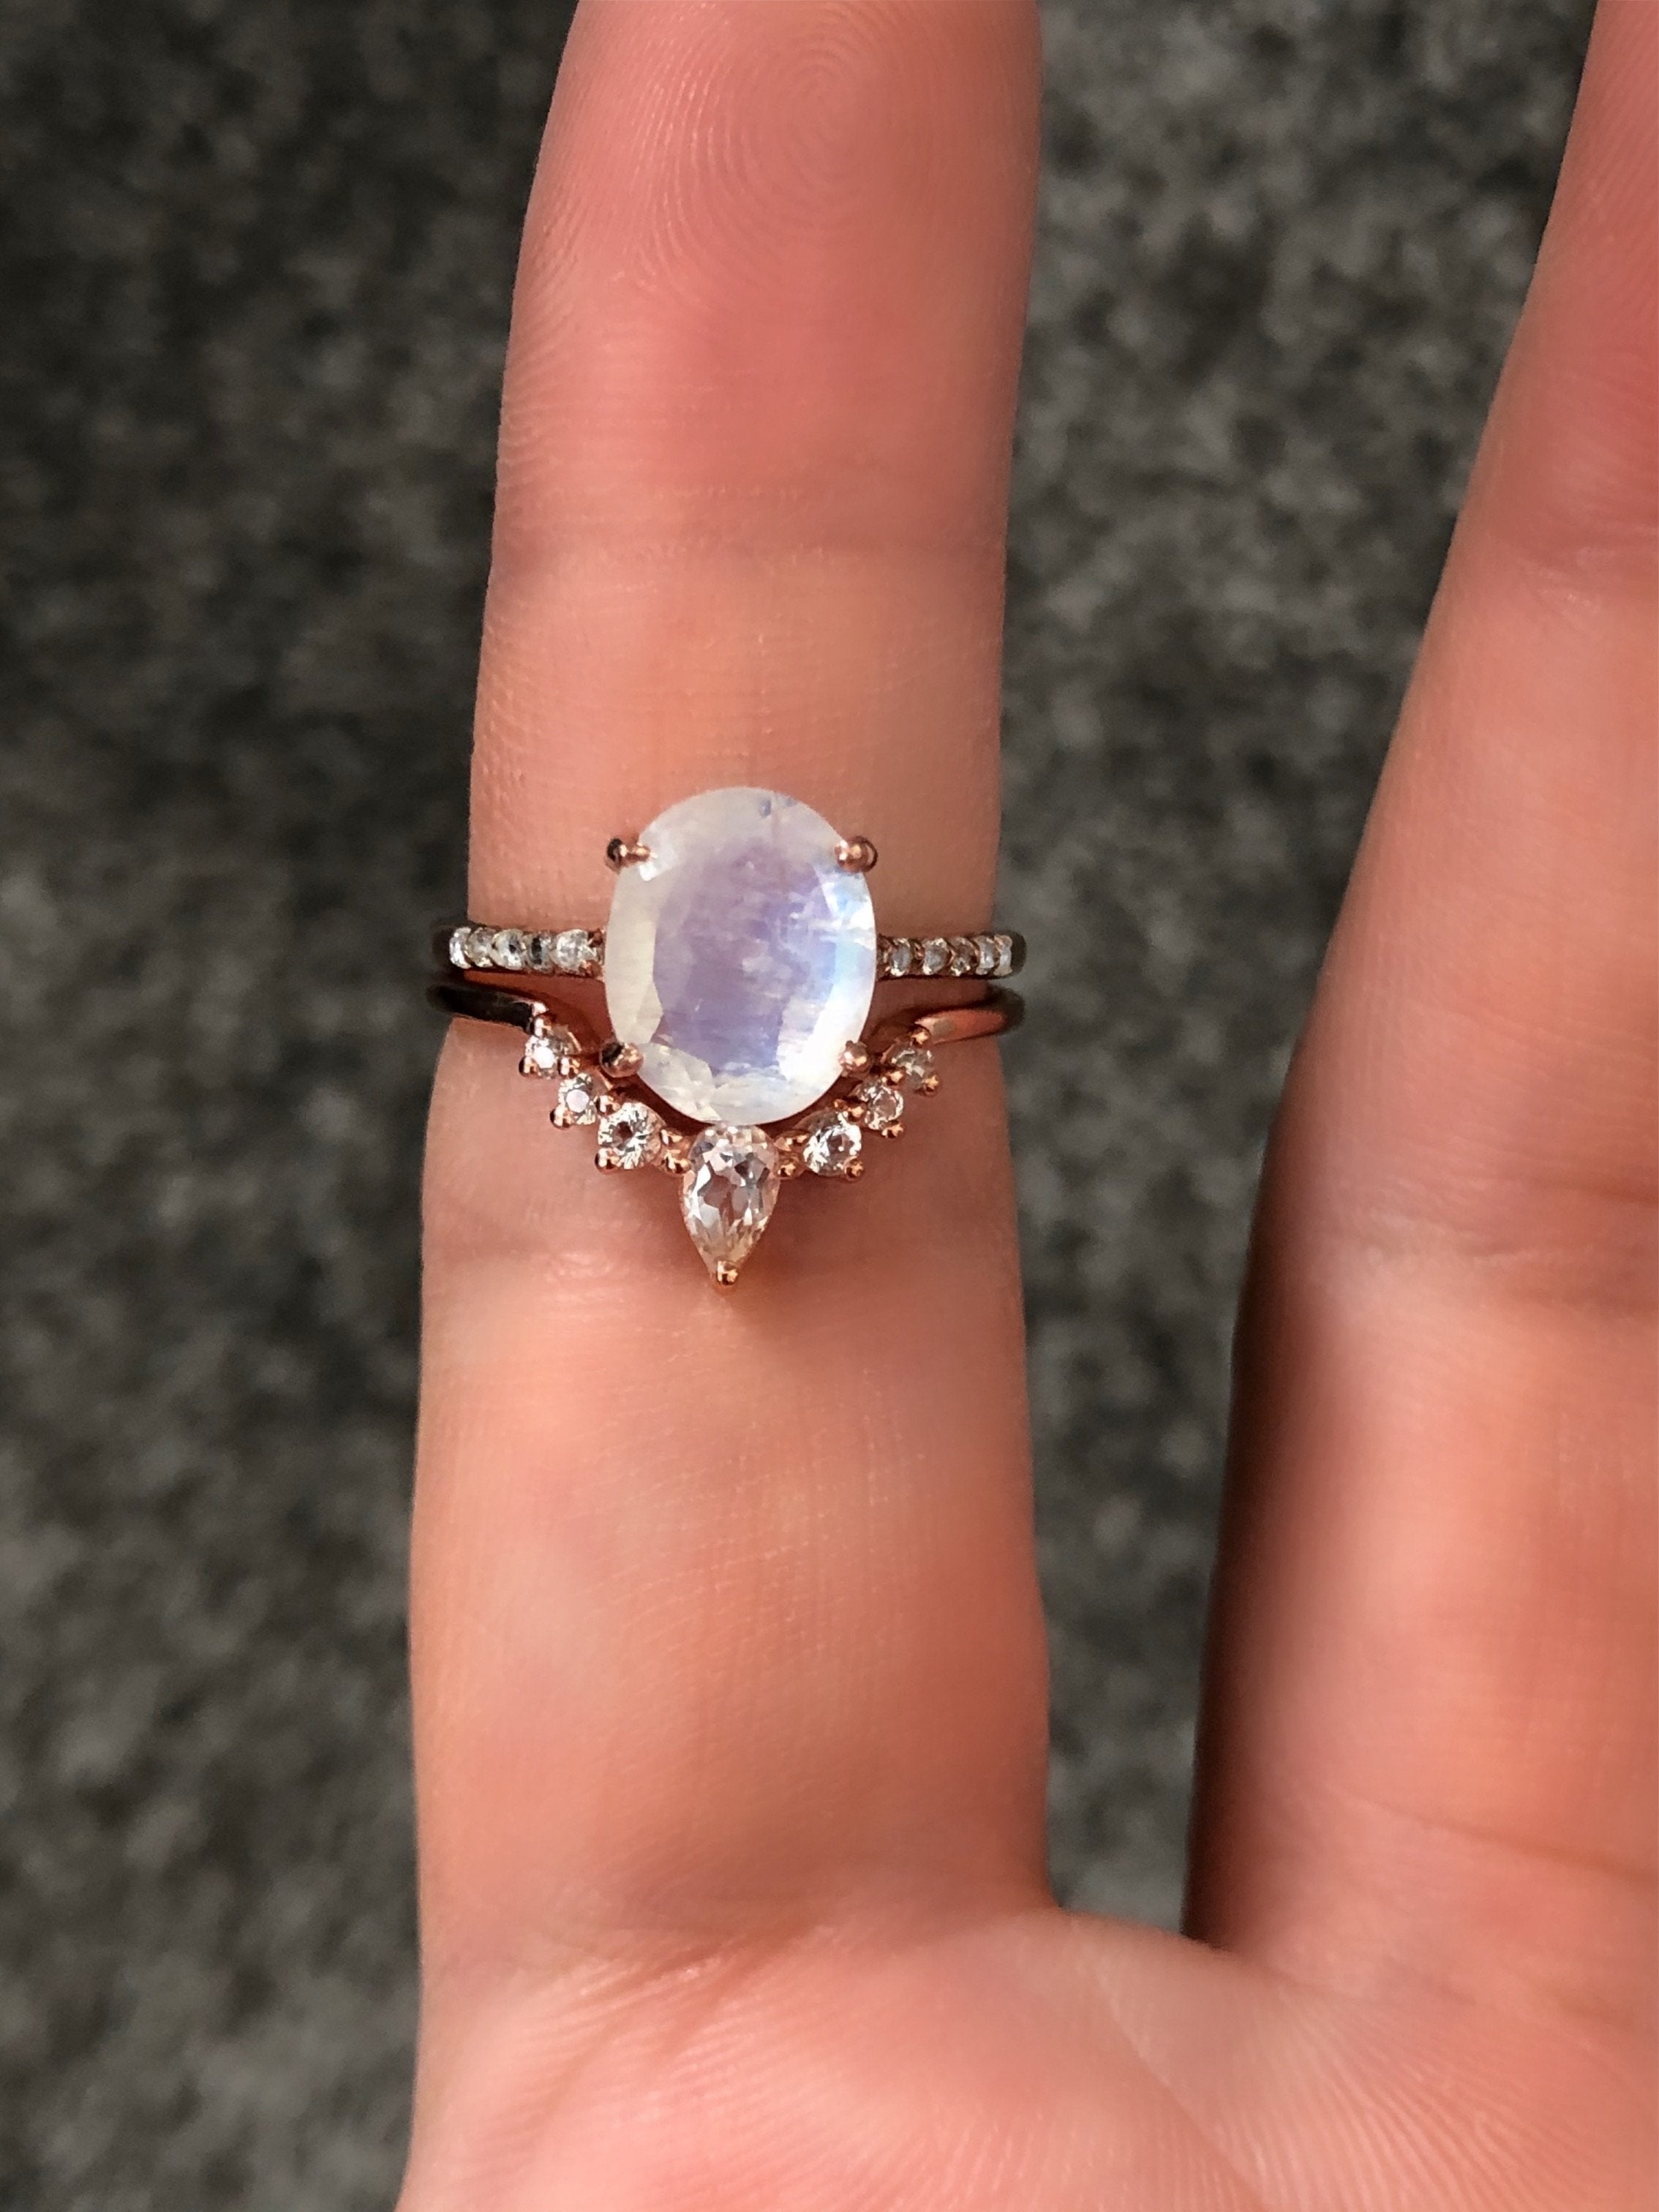 The Enchanted Ring/18k Rose Gold Vermeil with Rainbow Moonstone and White Topaz - infinityXinfinity.co.uk